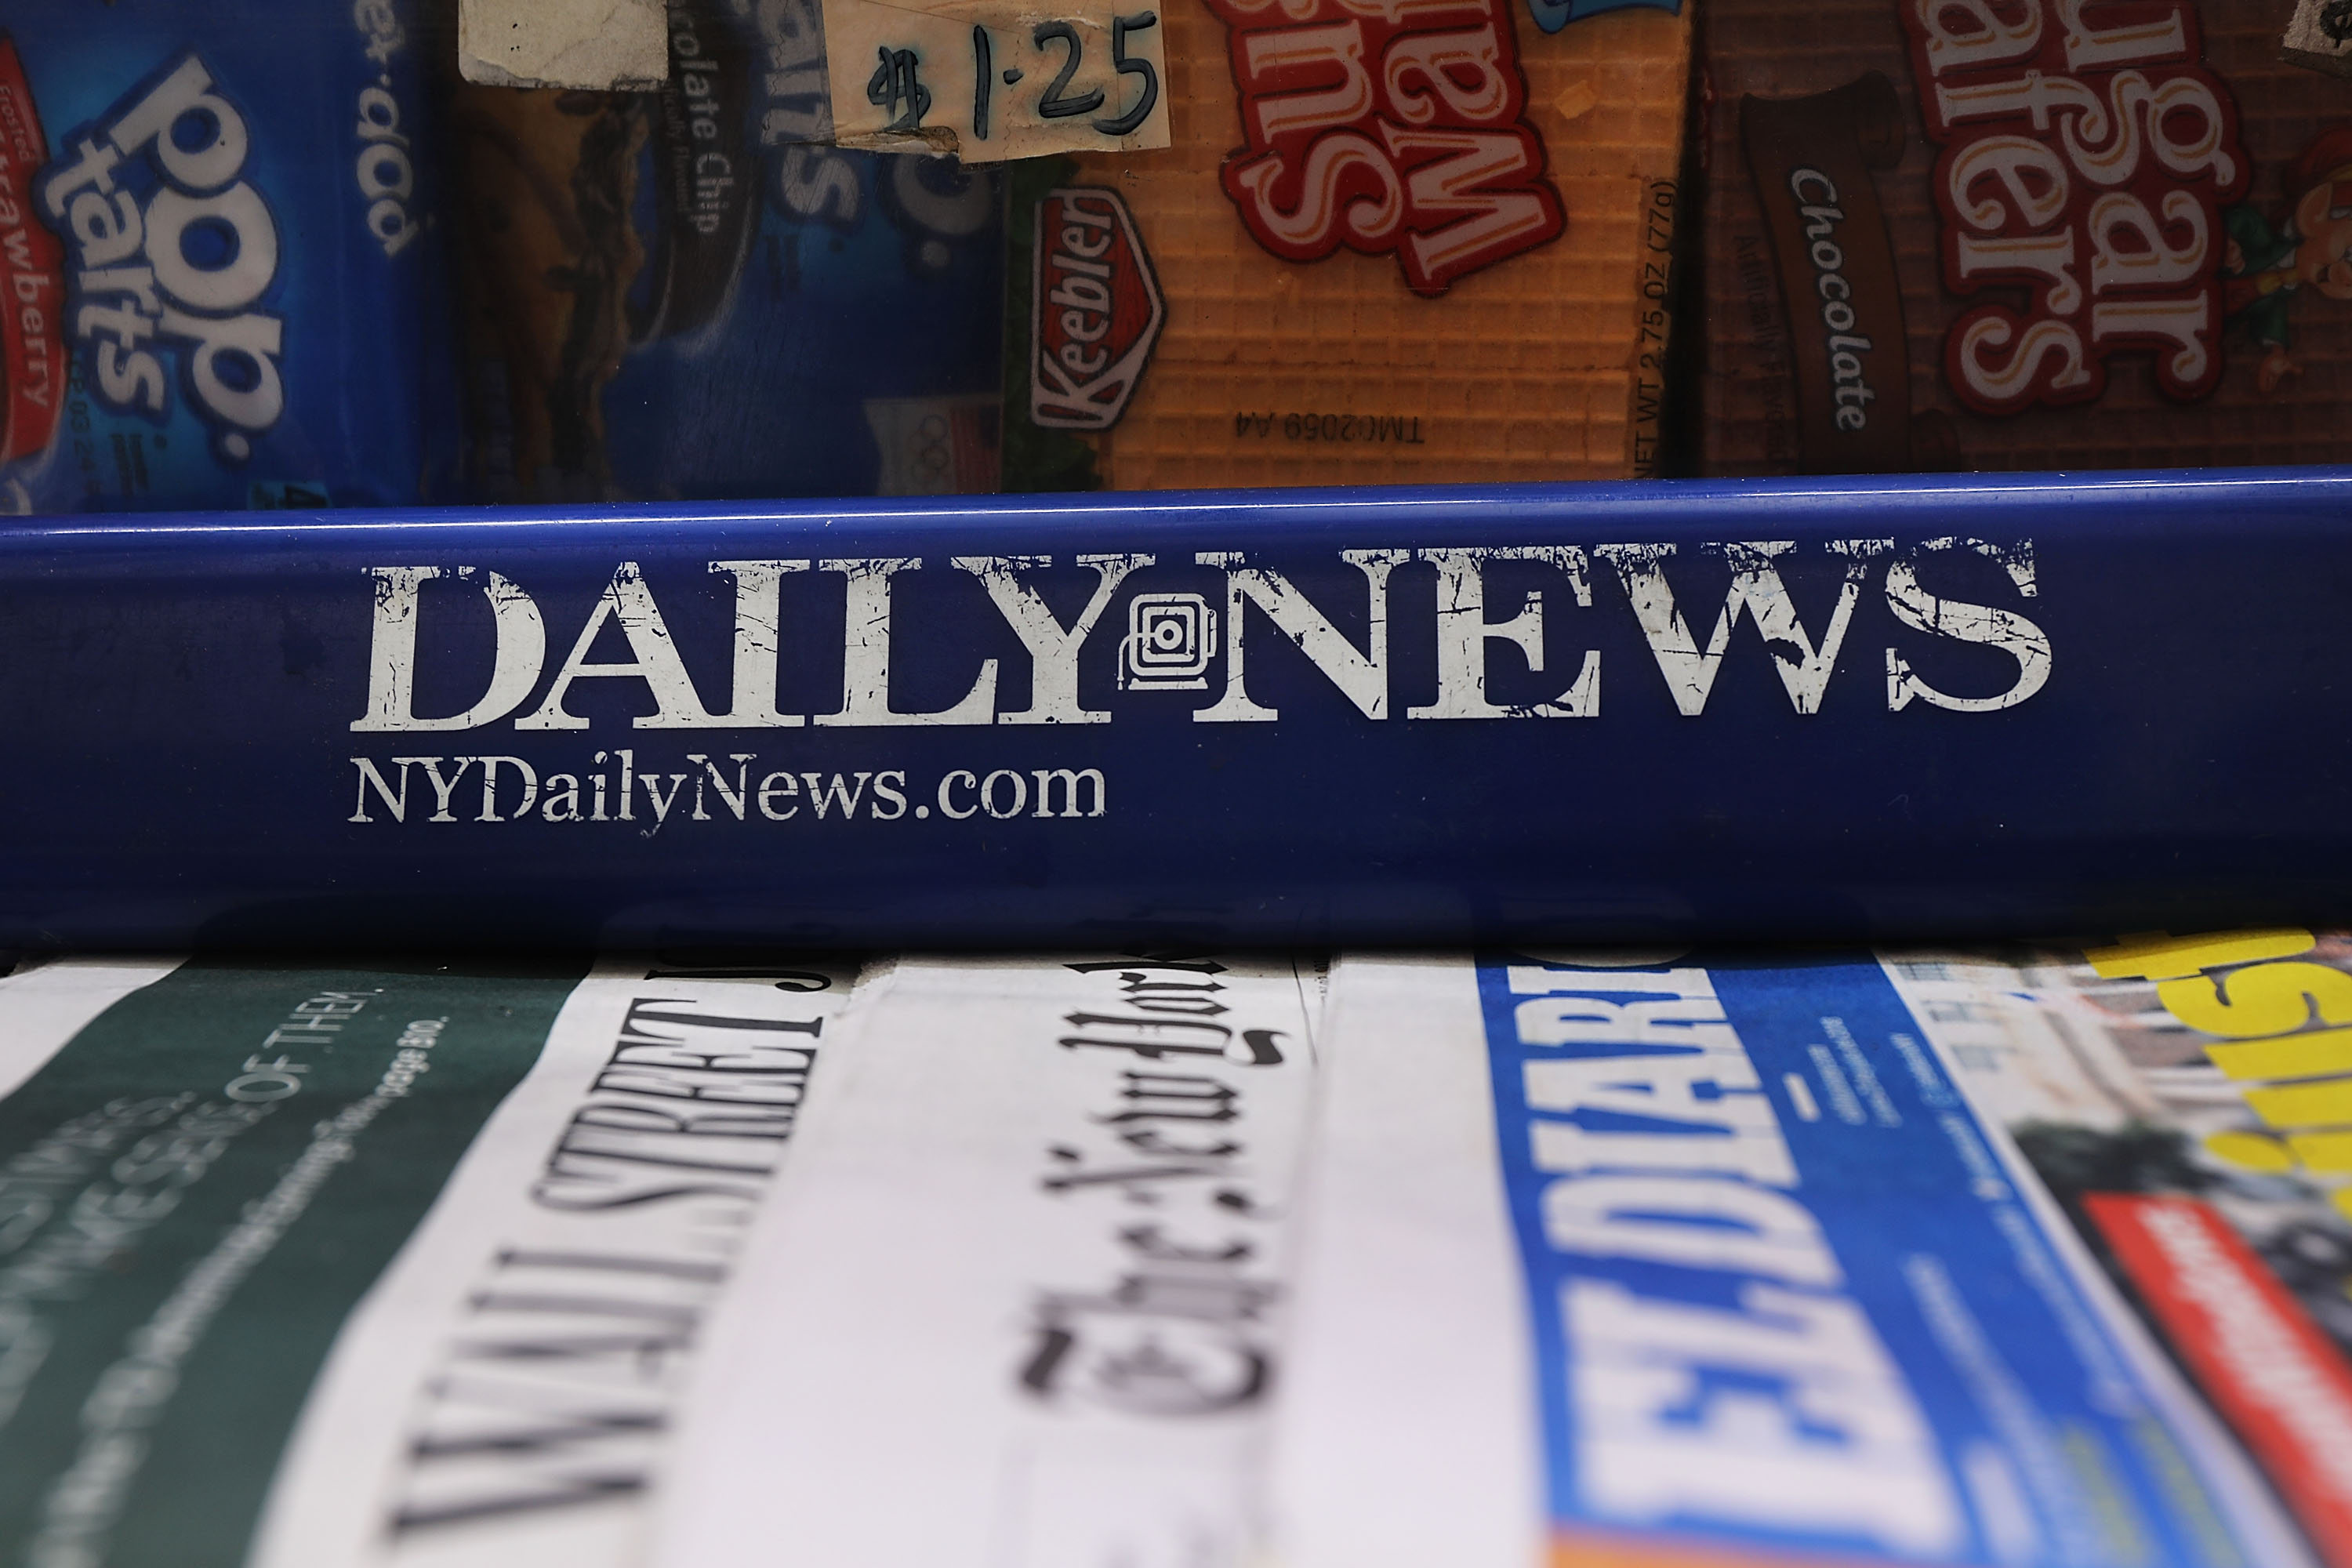 The New York Daily News logo on a newsstand